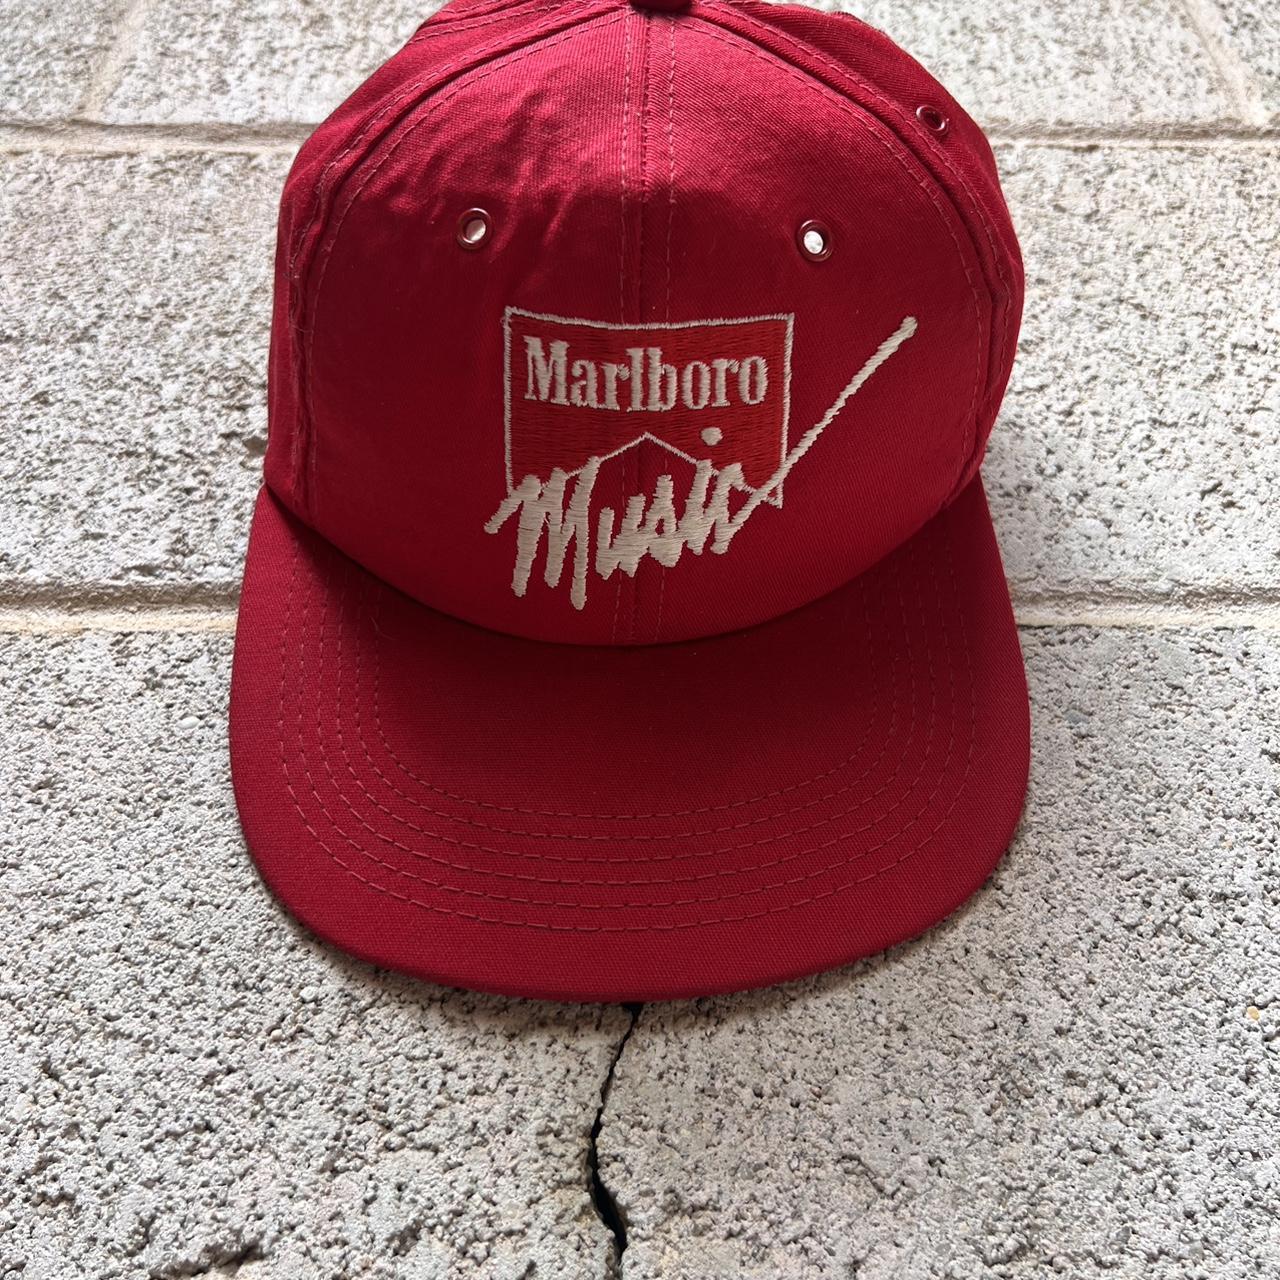 Vintage Marlboro Music hat, extremely rare only seen